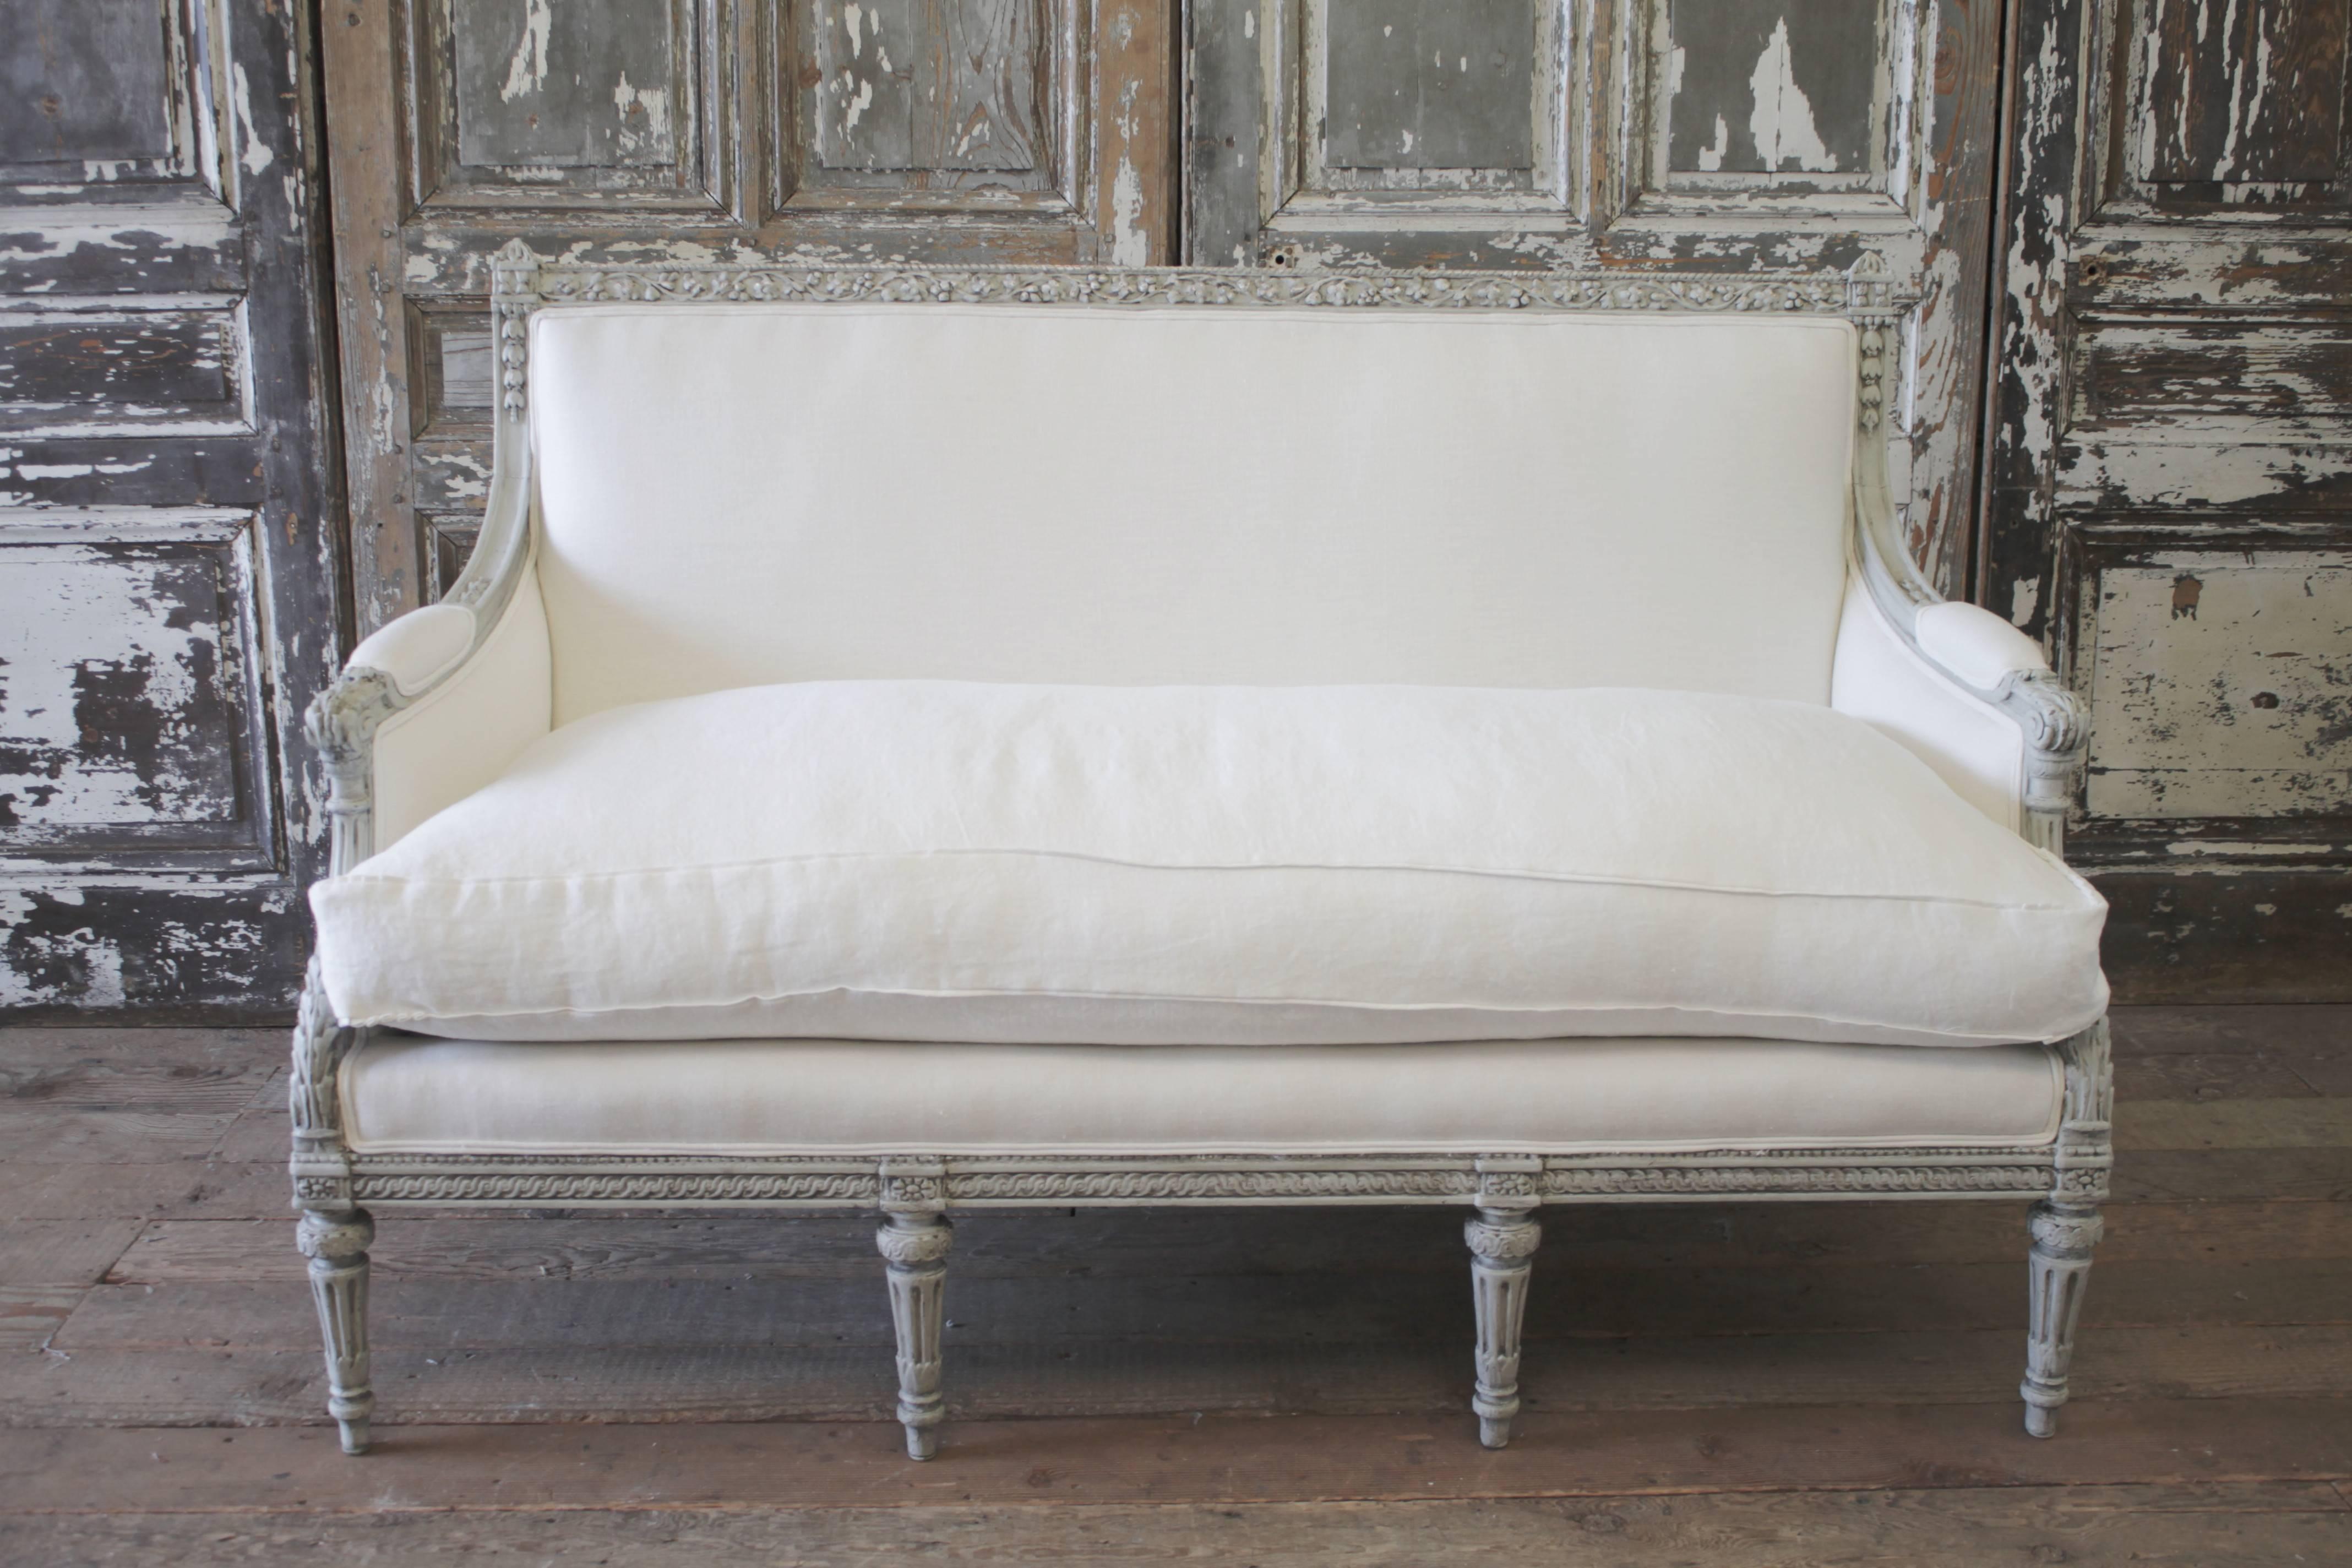 Beautiful French carved sofa in the Classic Louis XVI style.
We painted this frame in a soft clam shell grey, hand applied faux glaze and waxed finish. You can see a little gilt and creamy color paint peeking through. Gorgeous acanthus leaf